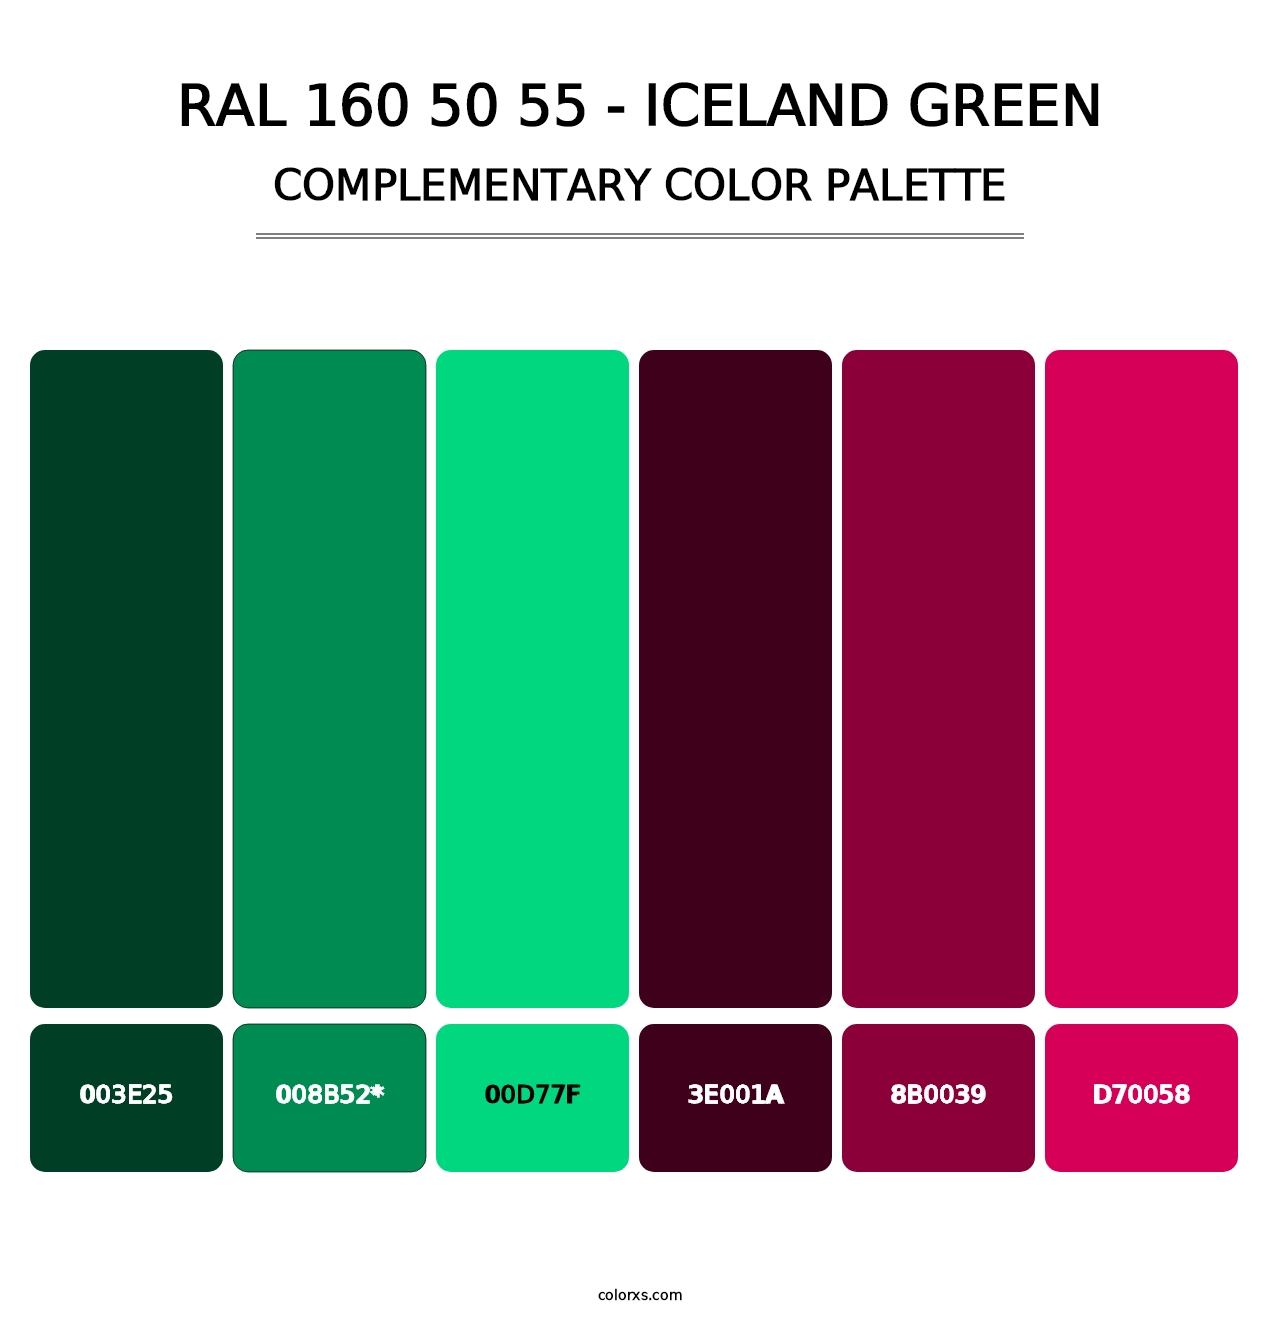 RAL 160 50 55 - Iceland Green - Complementary Color Palette